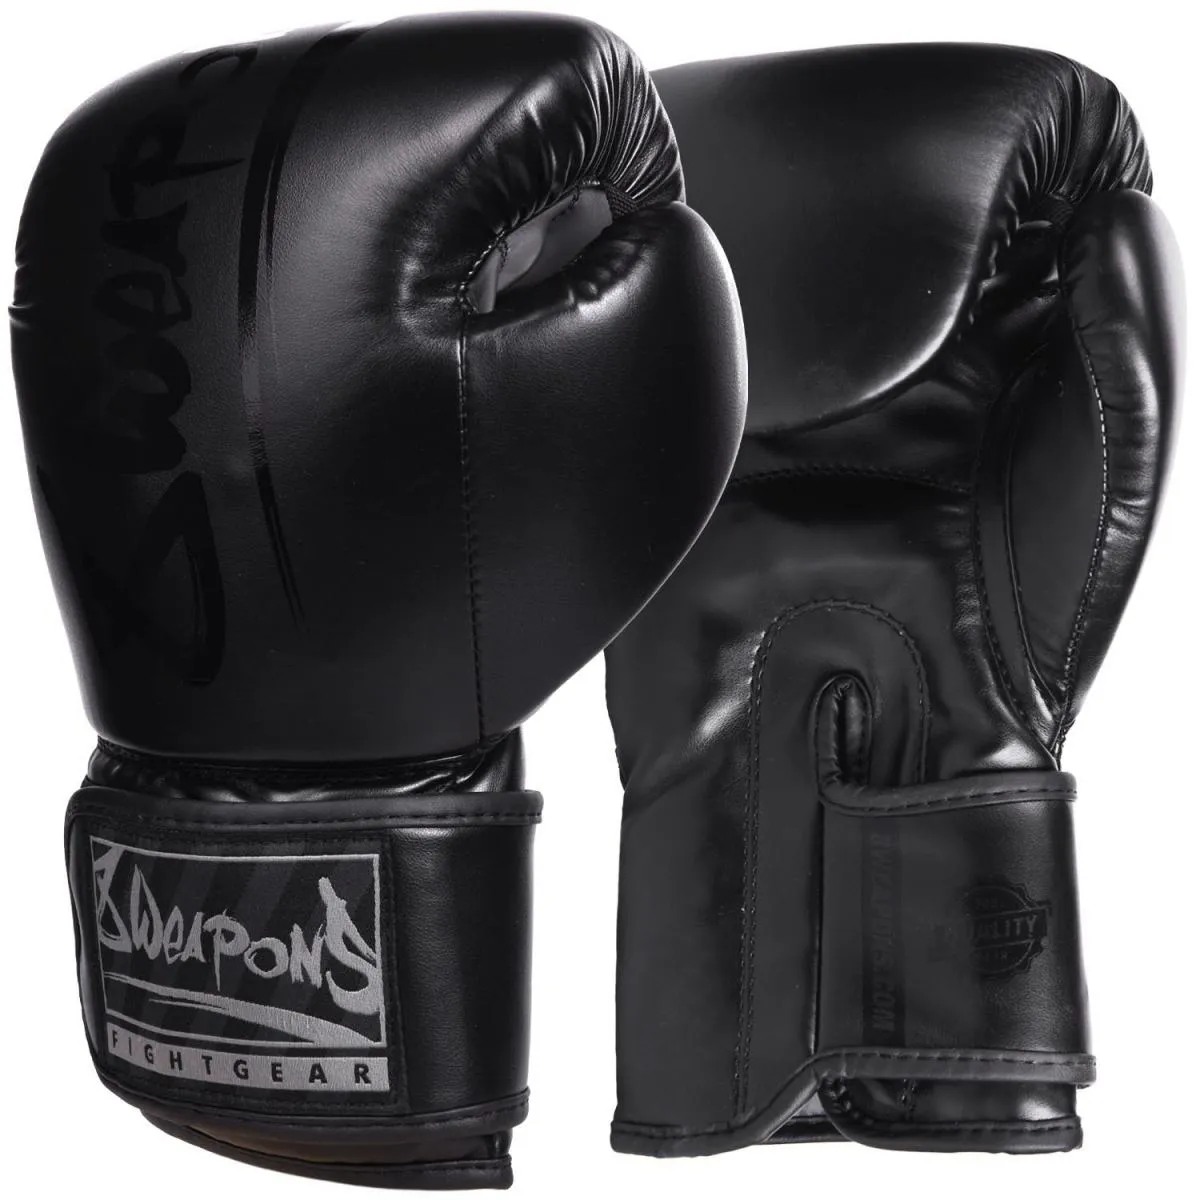 2023 Pro Leather Boxing Gloves for Men & Women, Boxing Training Gloves, Kick Boxing Gloves with Free Hand Wraps